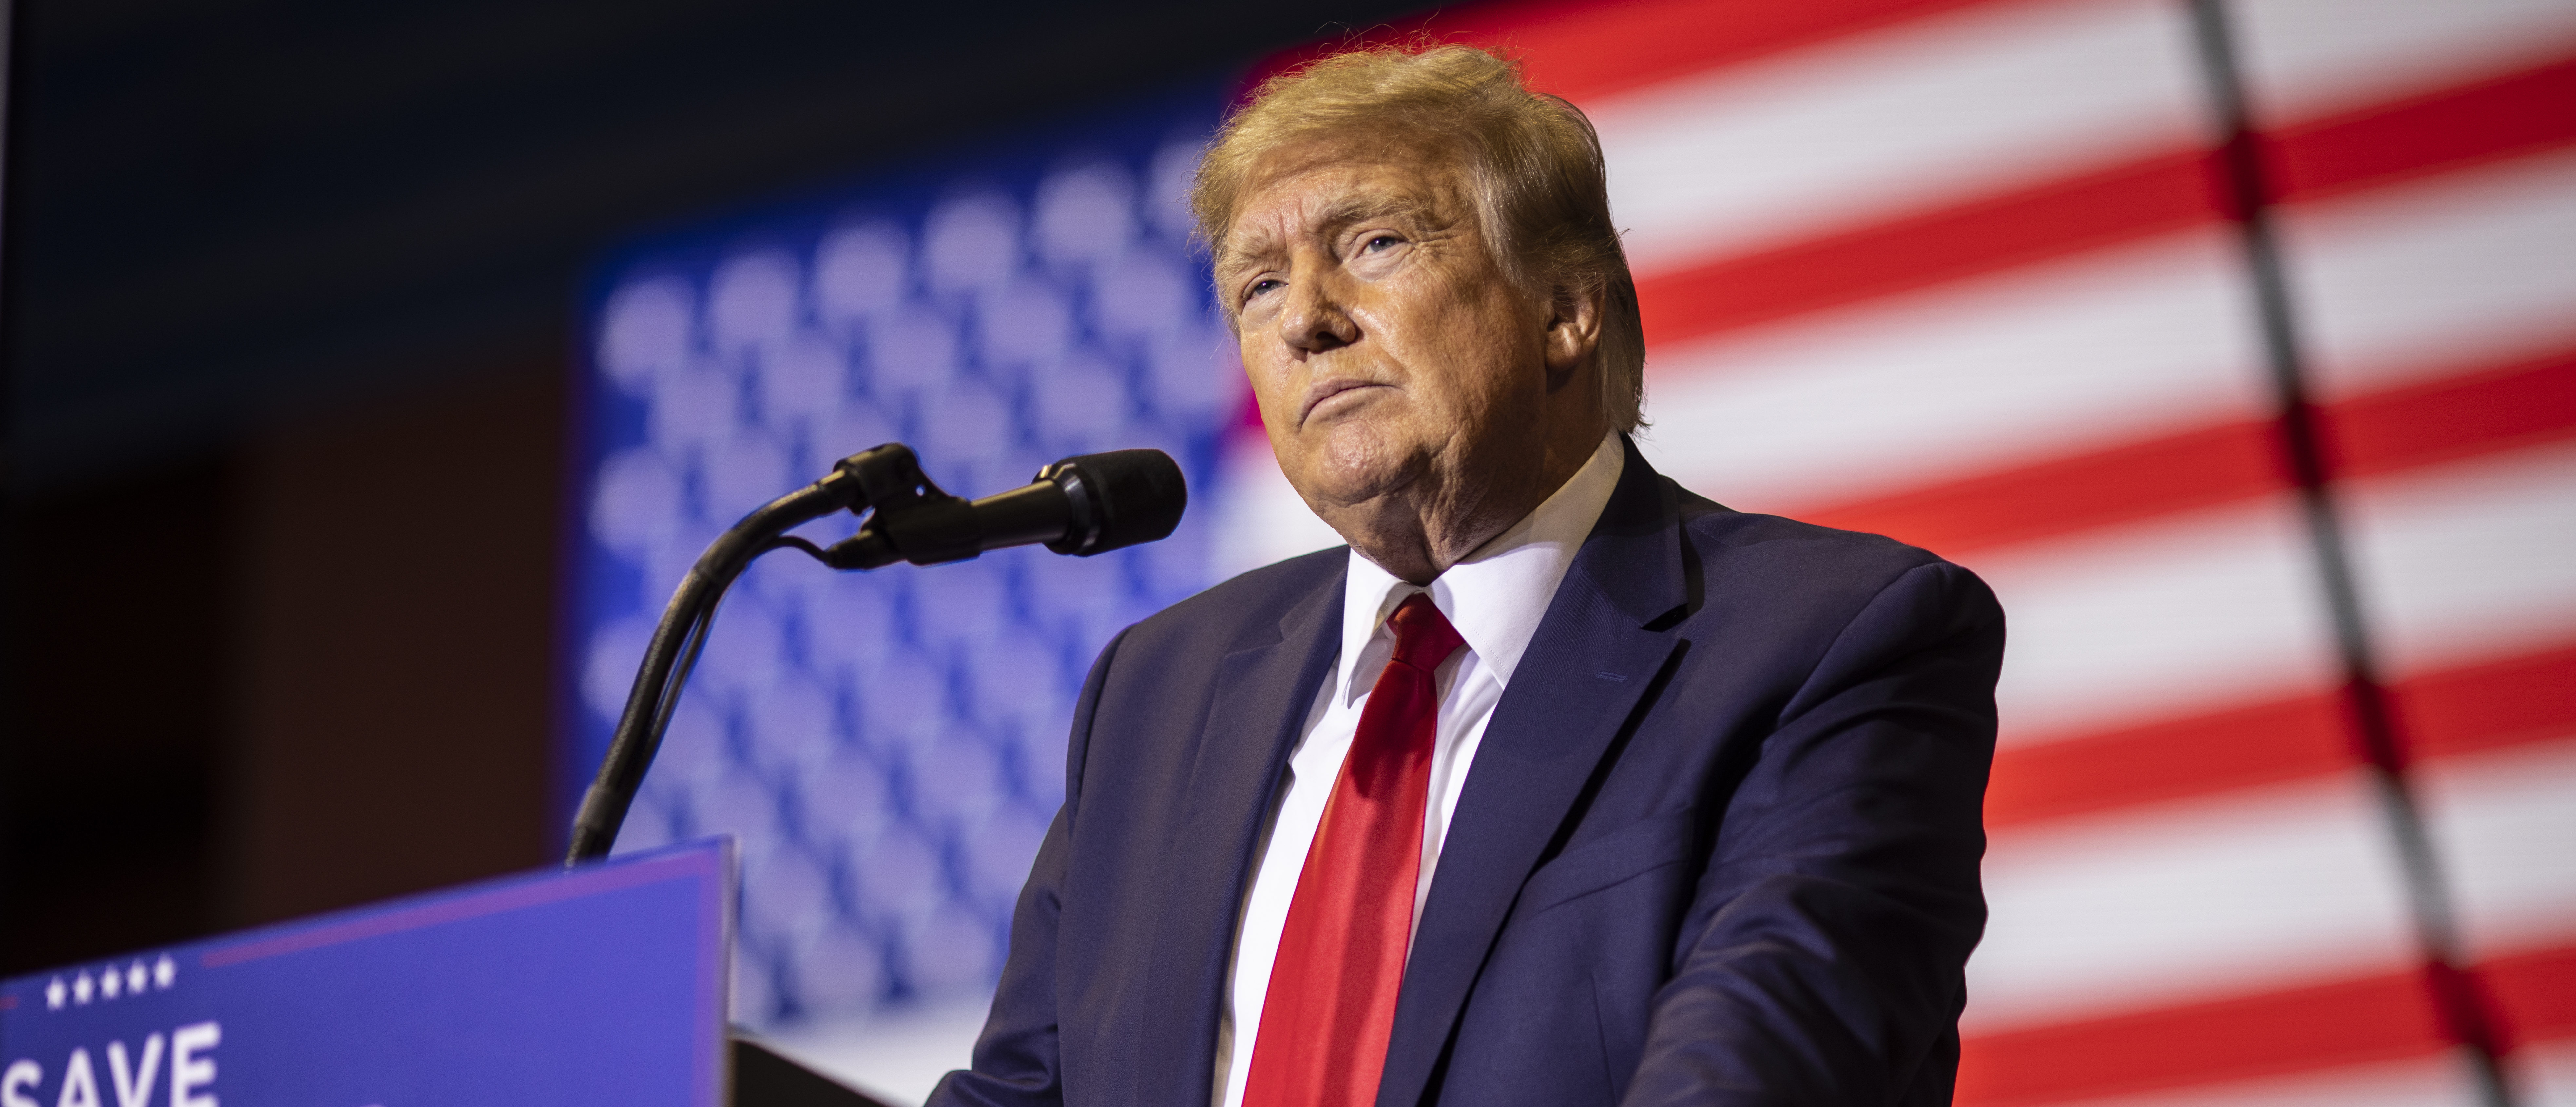 CASPER, WY - MAY 28: Former President Donald Trump speaks at a rally on May 28, 2022 in Casper, Wyoming. The rally is being held to support Harriet Hageman, Rep. Liz Cheney’s primary challenger in Wyoming. (Photo by Chet Strange/Getty Images)